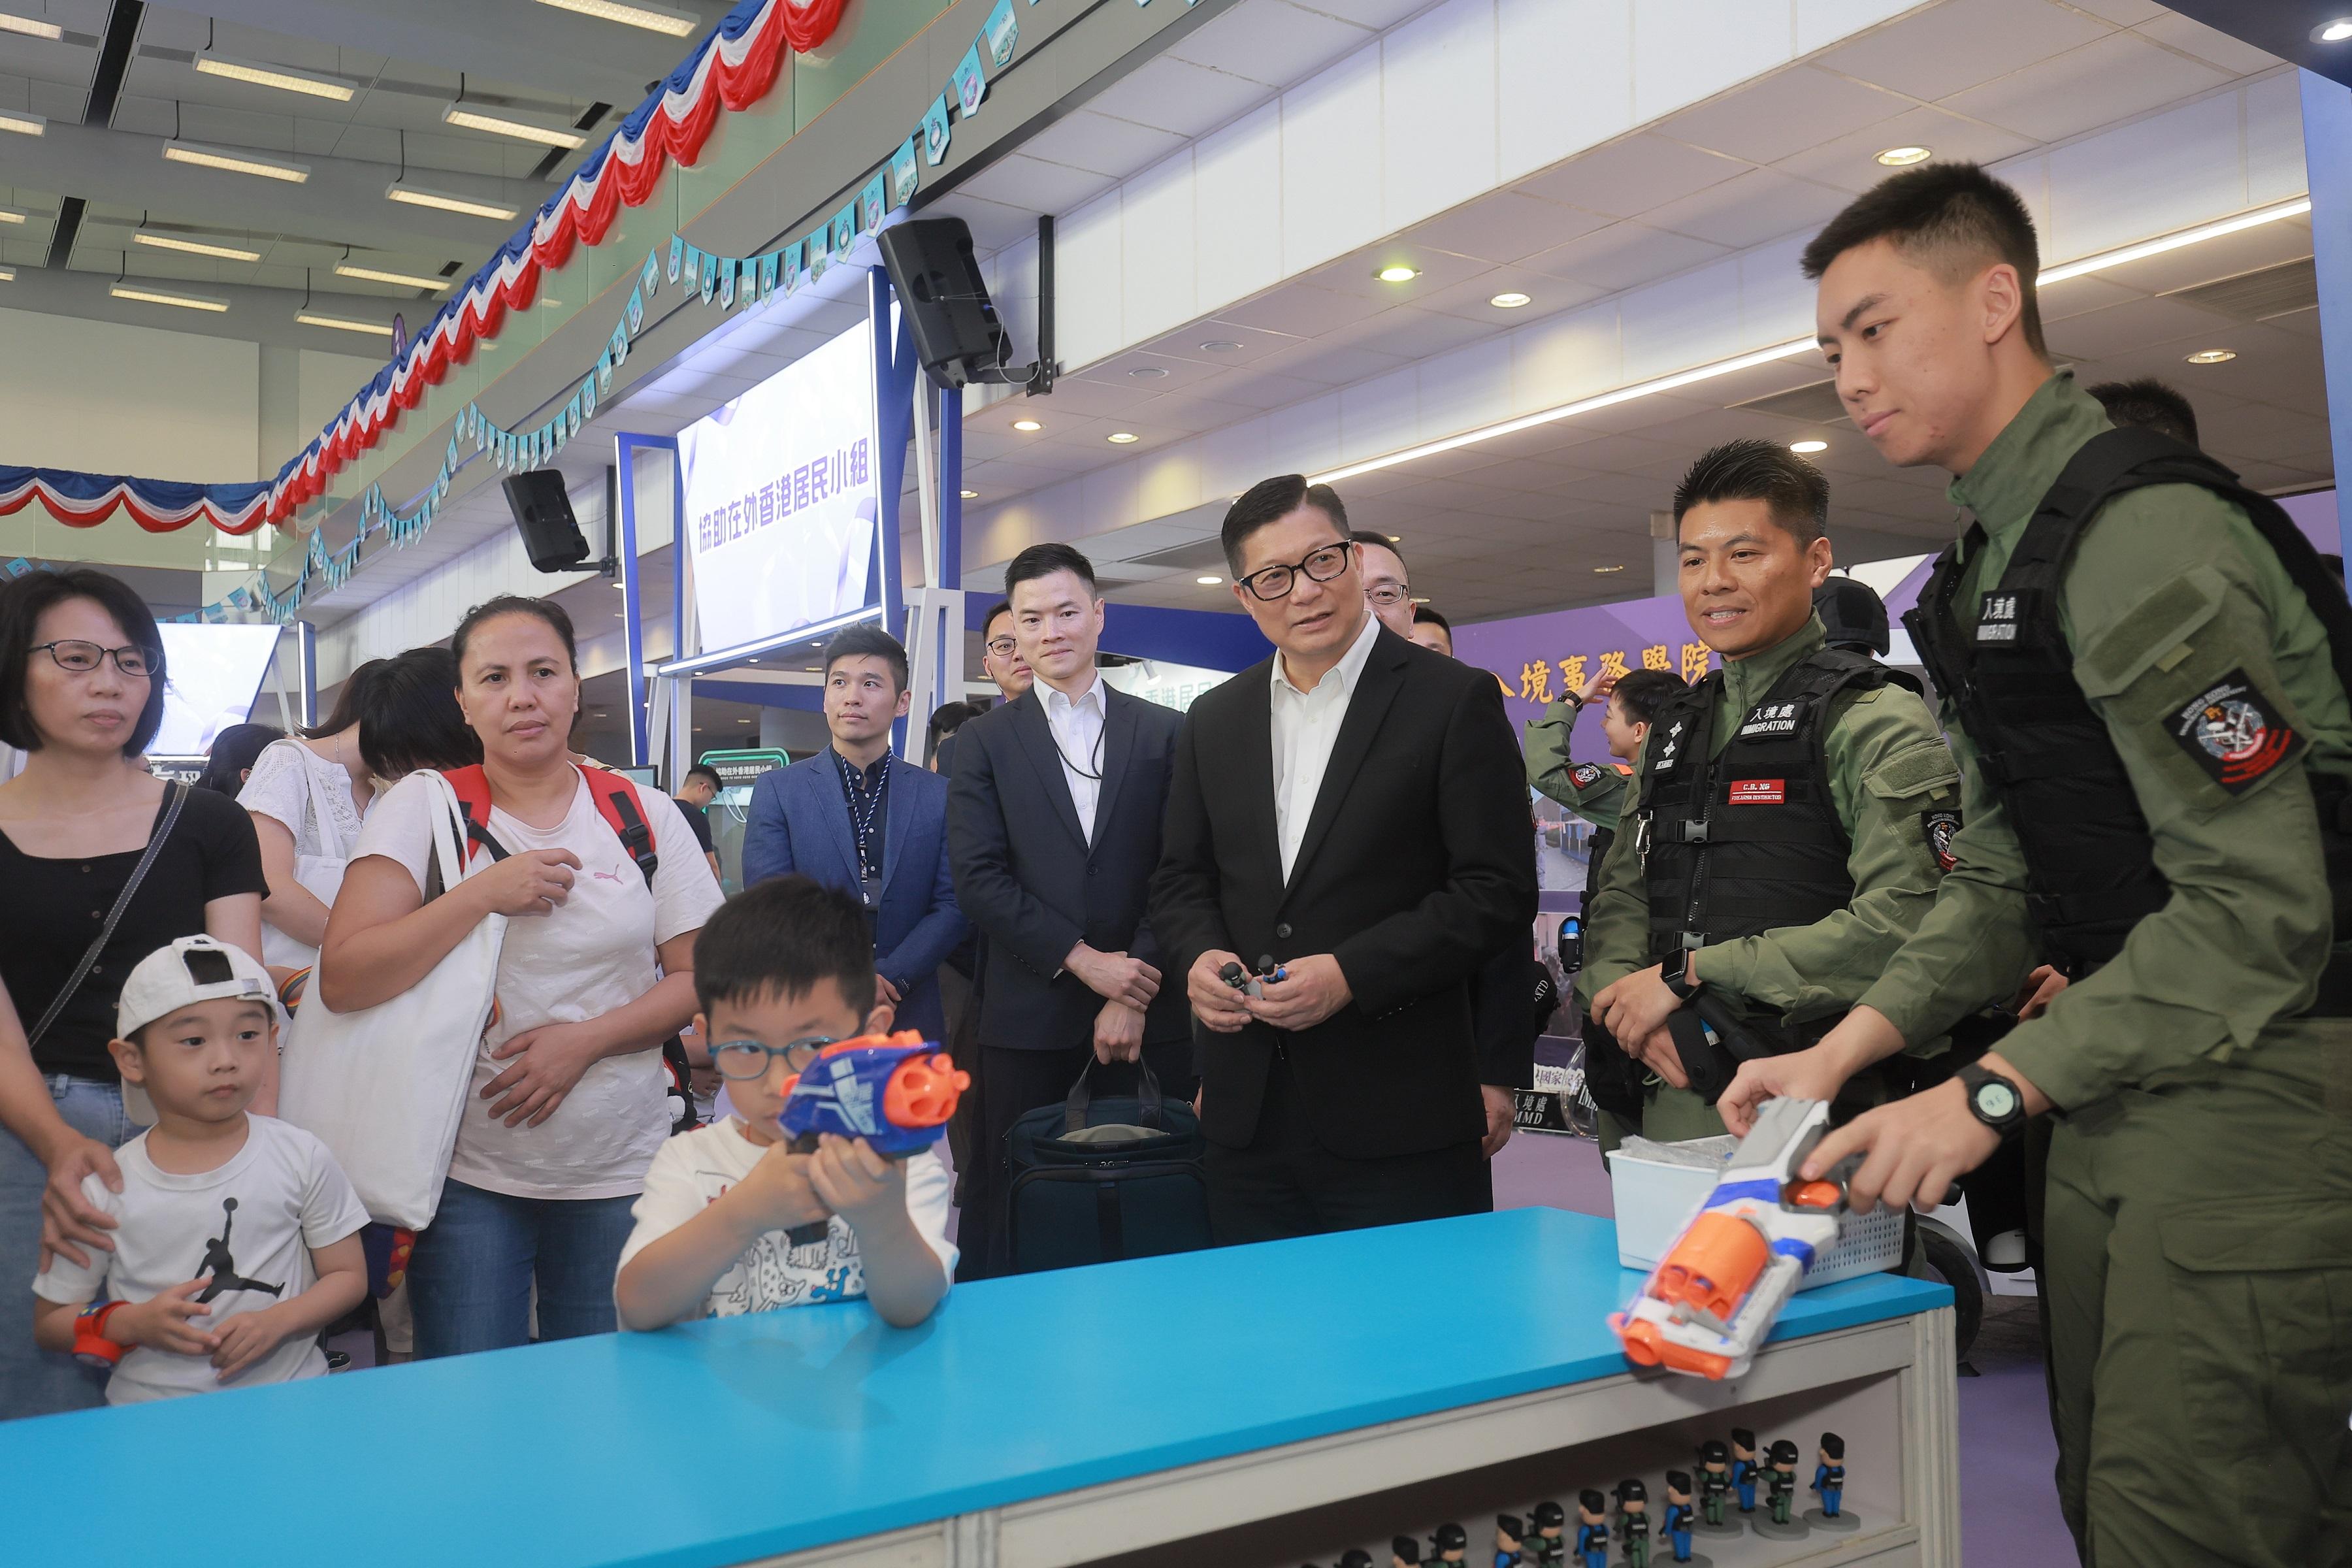 To support the National Security Education Day, the Immigration Service Institute of Training and Development held an open day today (April 13). Photo shows the Secretary for Security, Mr Tang Ping-keung (third right), visiting an exhibition booth and interacting with the public. 